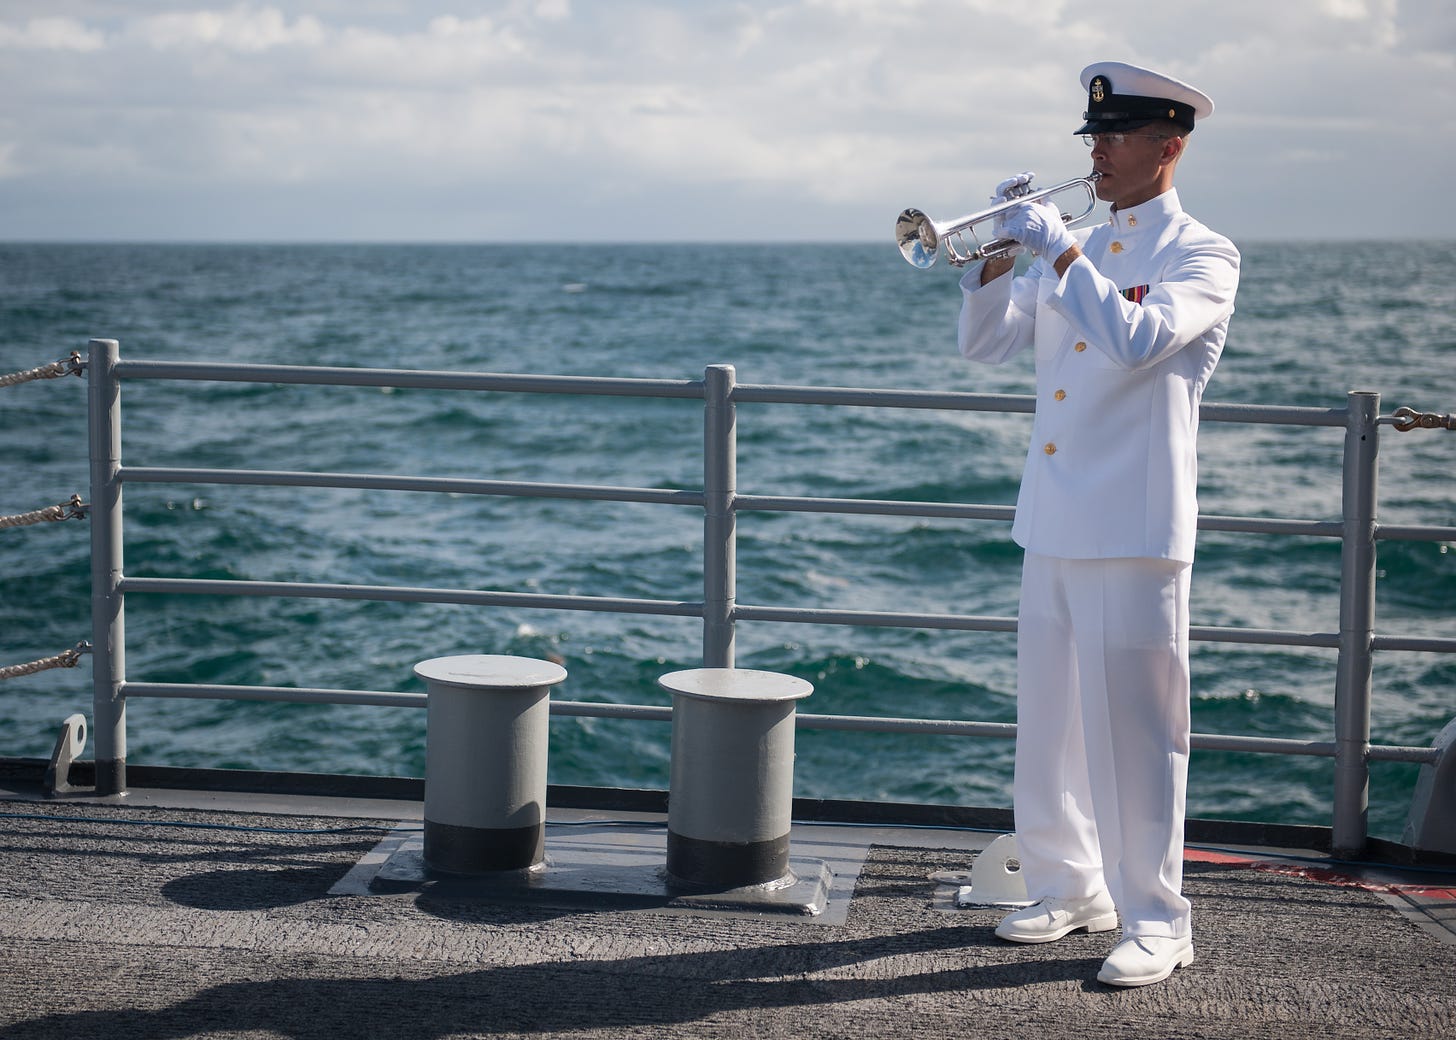 A man in a formal Navy uniform blows a trumpet on a ship with the ocean churning in the background.